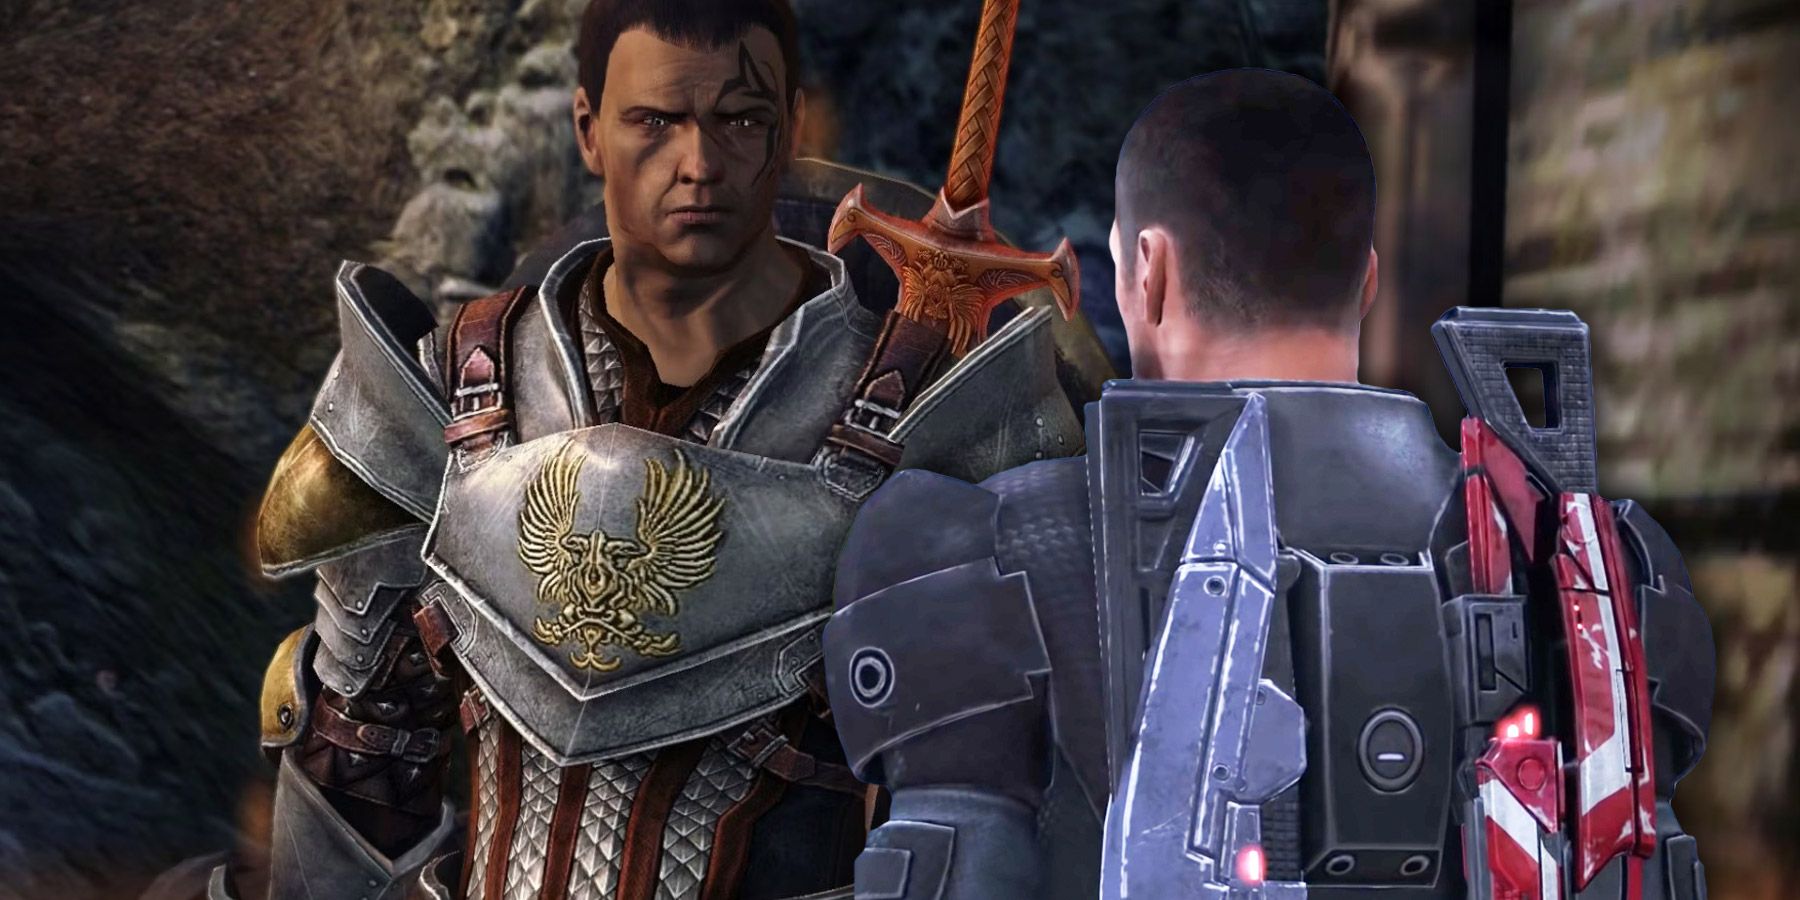 Future Mass Effect Games Should Take Dragon Age's Storytelling Approach